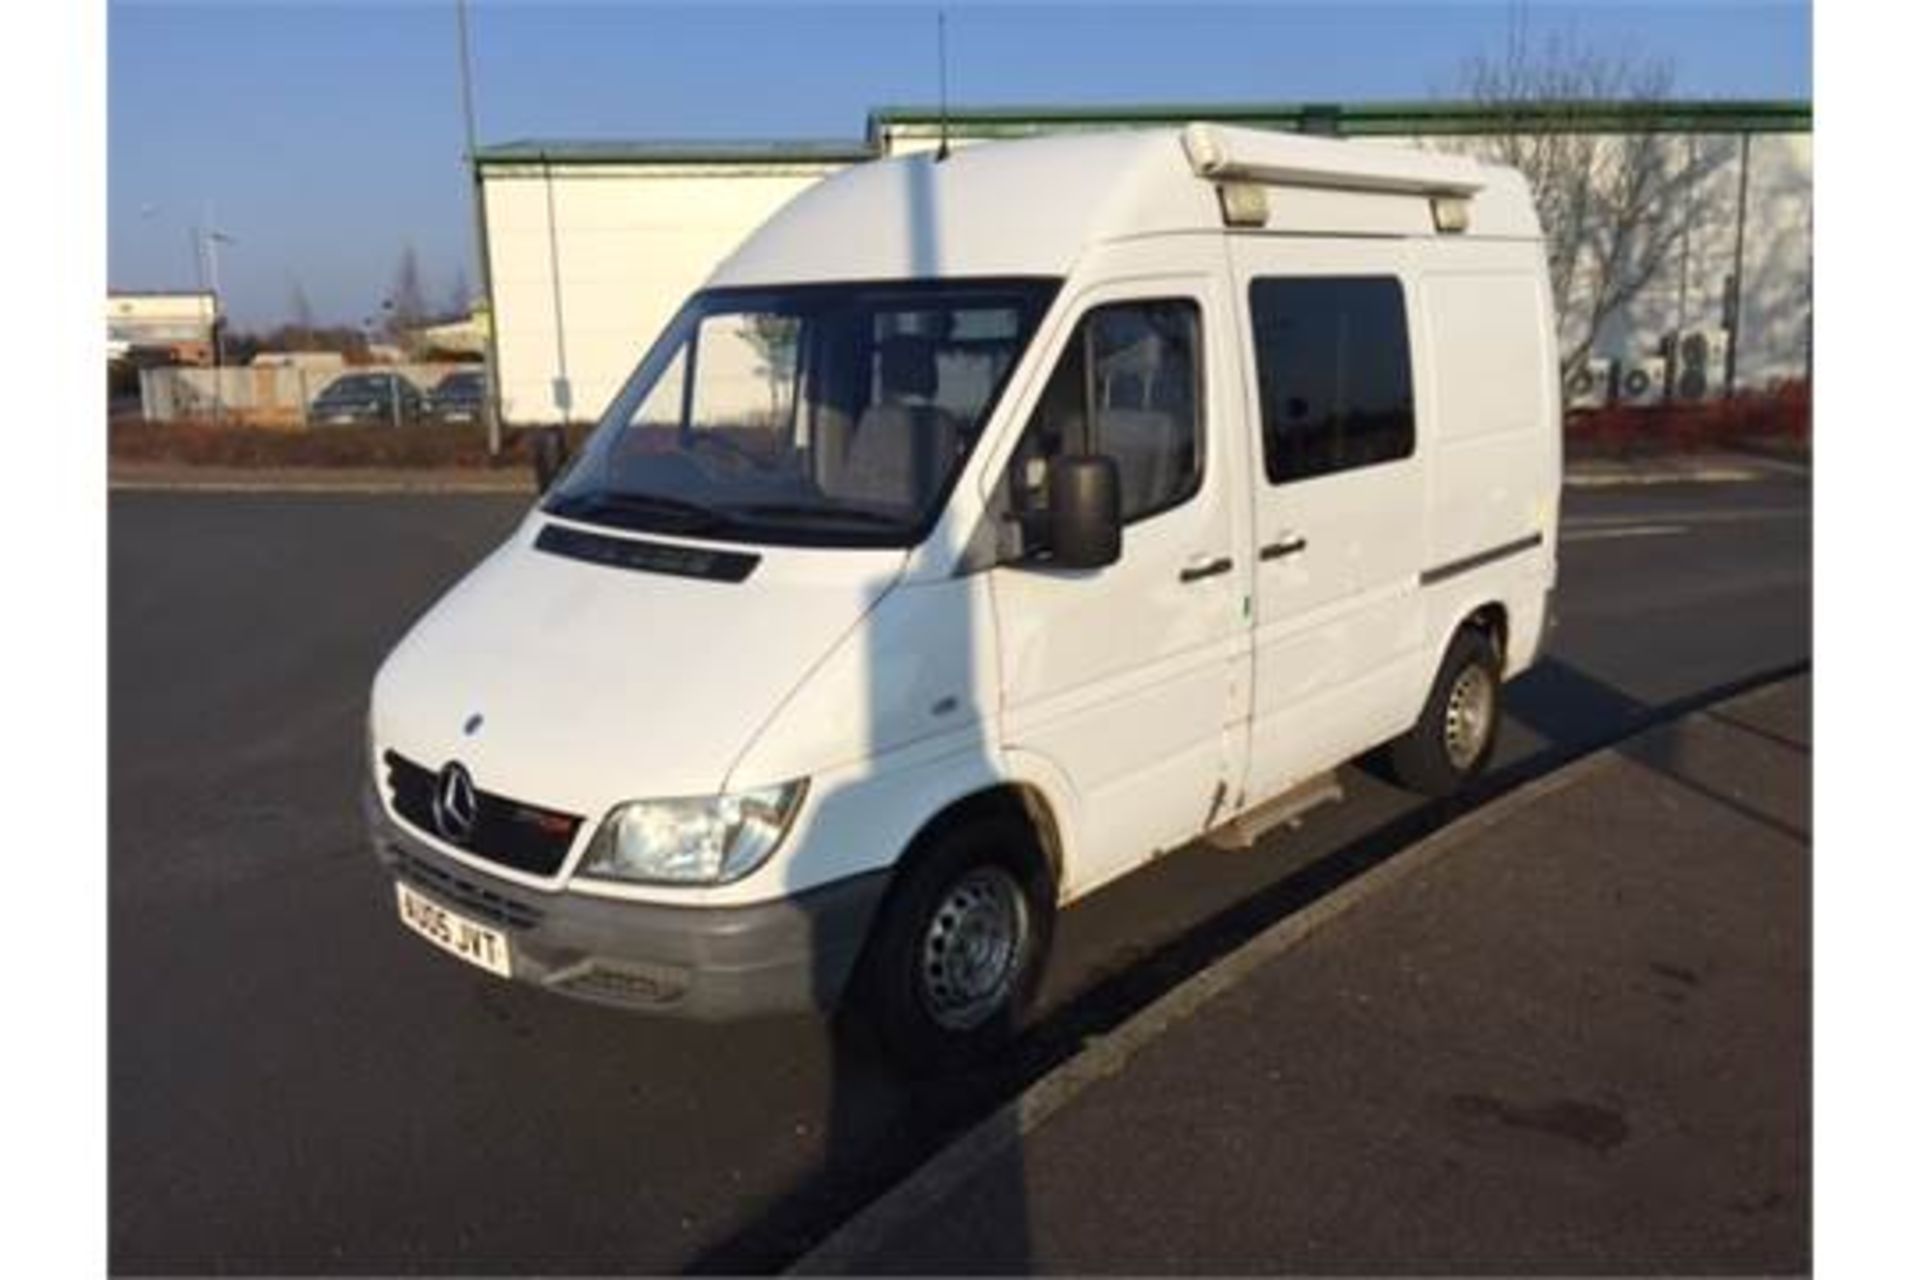 2005 Mercedes Sprinter 311 cdi 2148cc Diesel Van with side windows Owned and used by the police from - Image 2 of 23